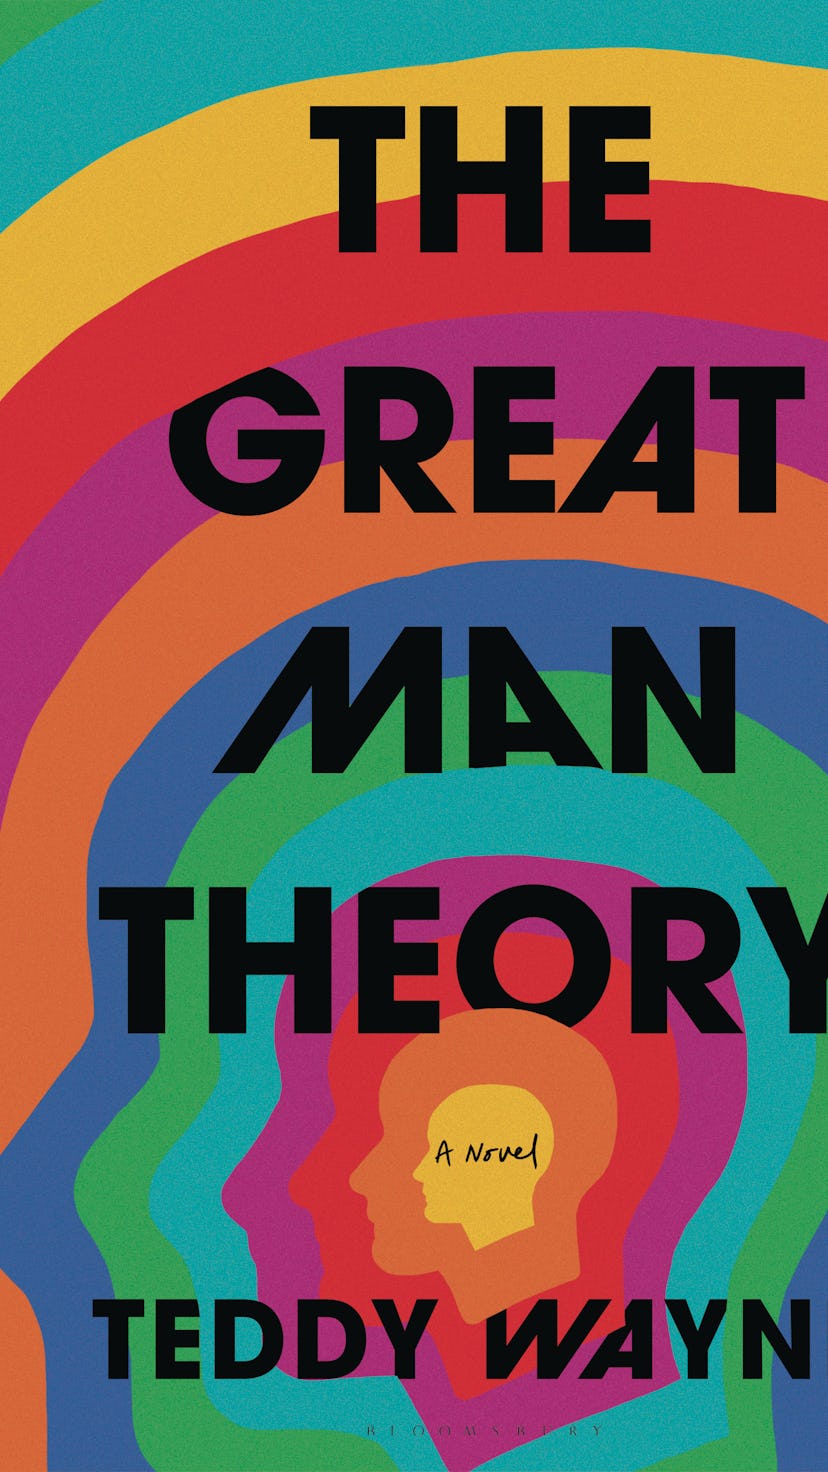 The cover of the book 'The Great Man Theory' by Teddy Wayne